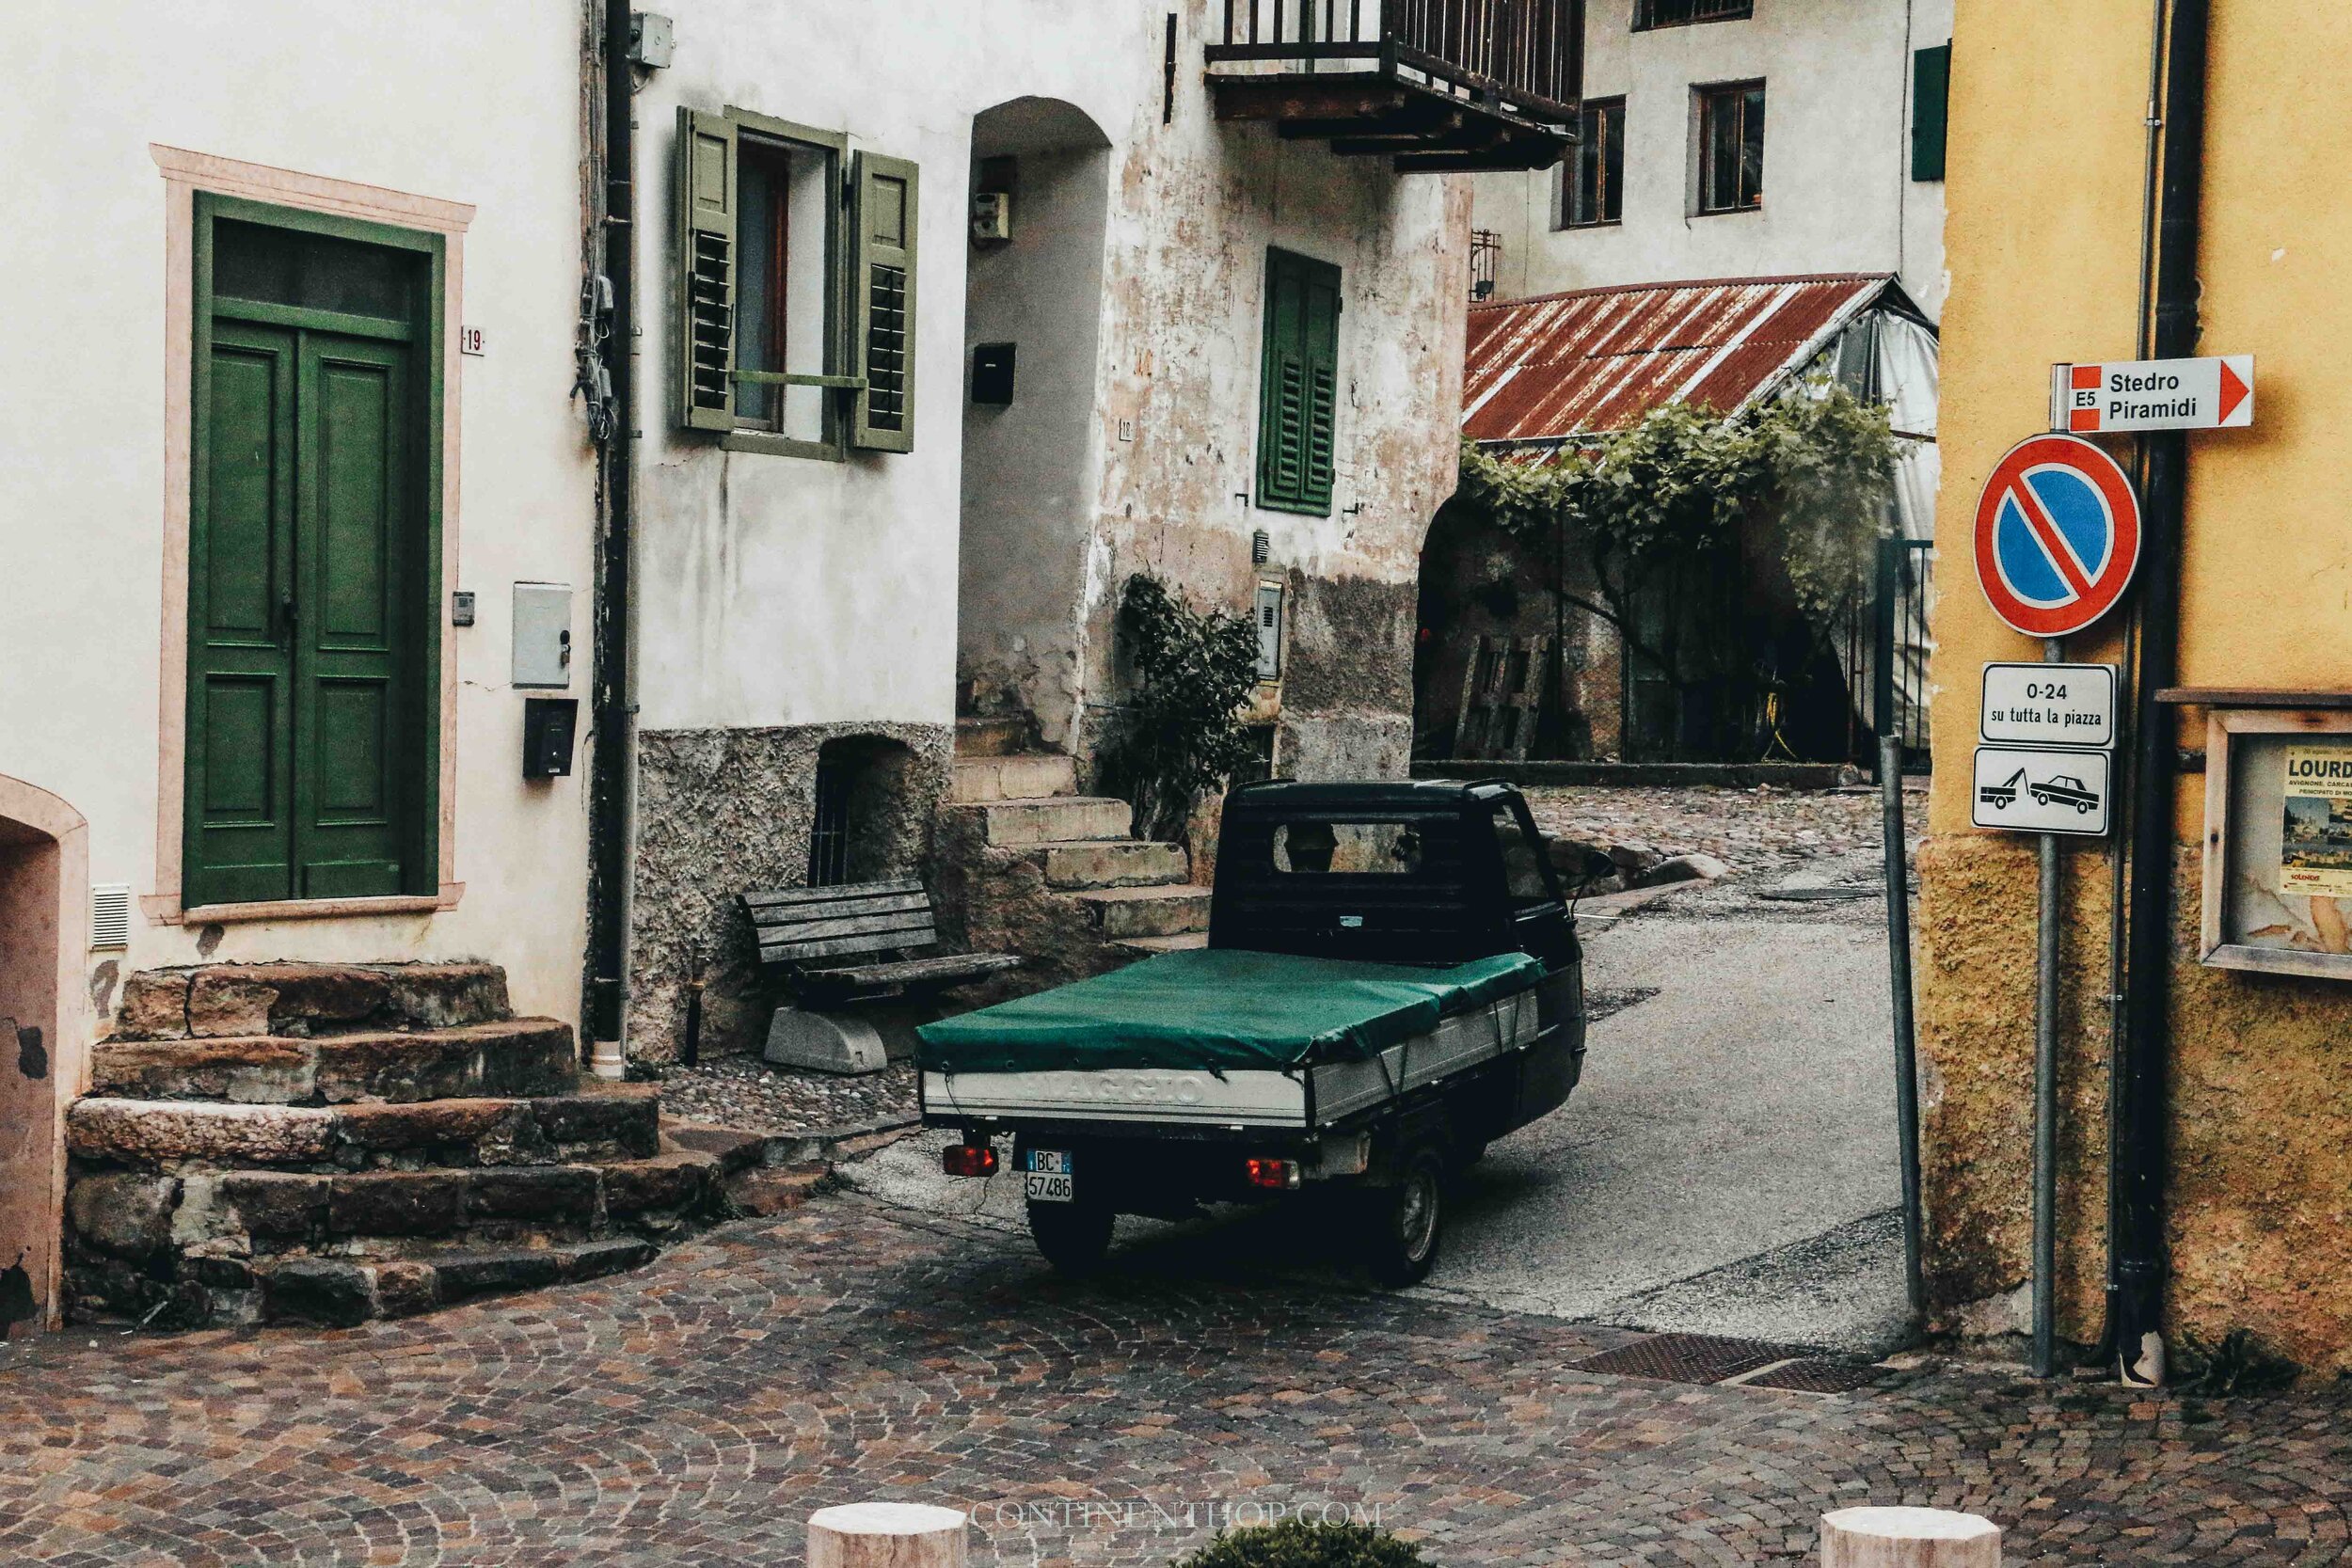 A small green van on a street in Valle Di Cembra Trentino Italy